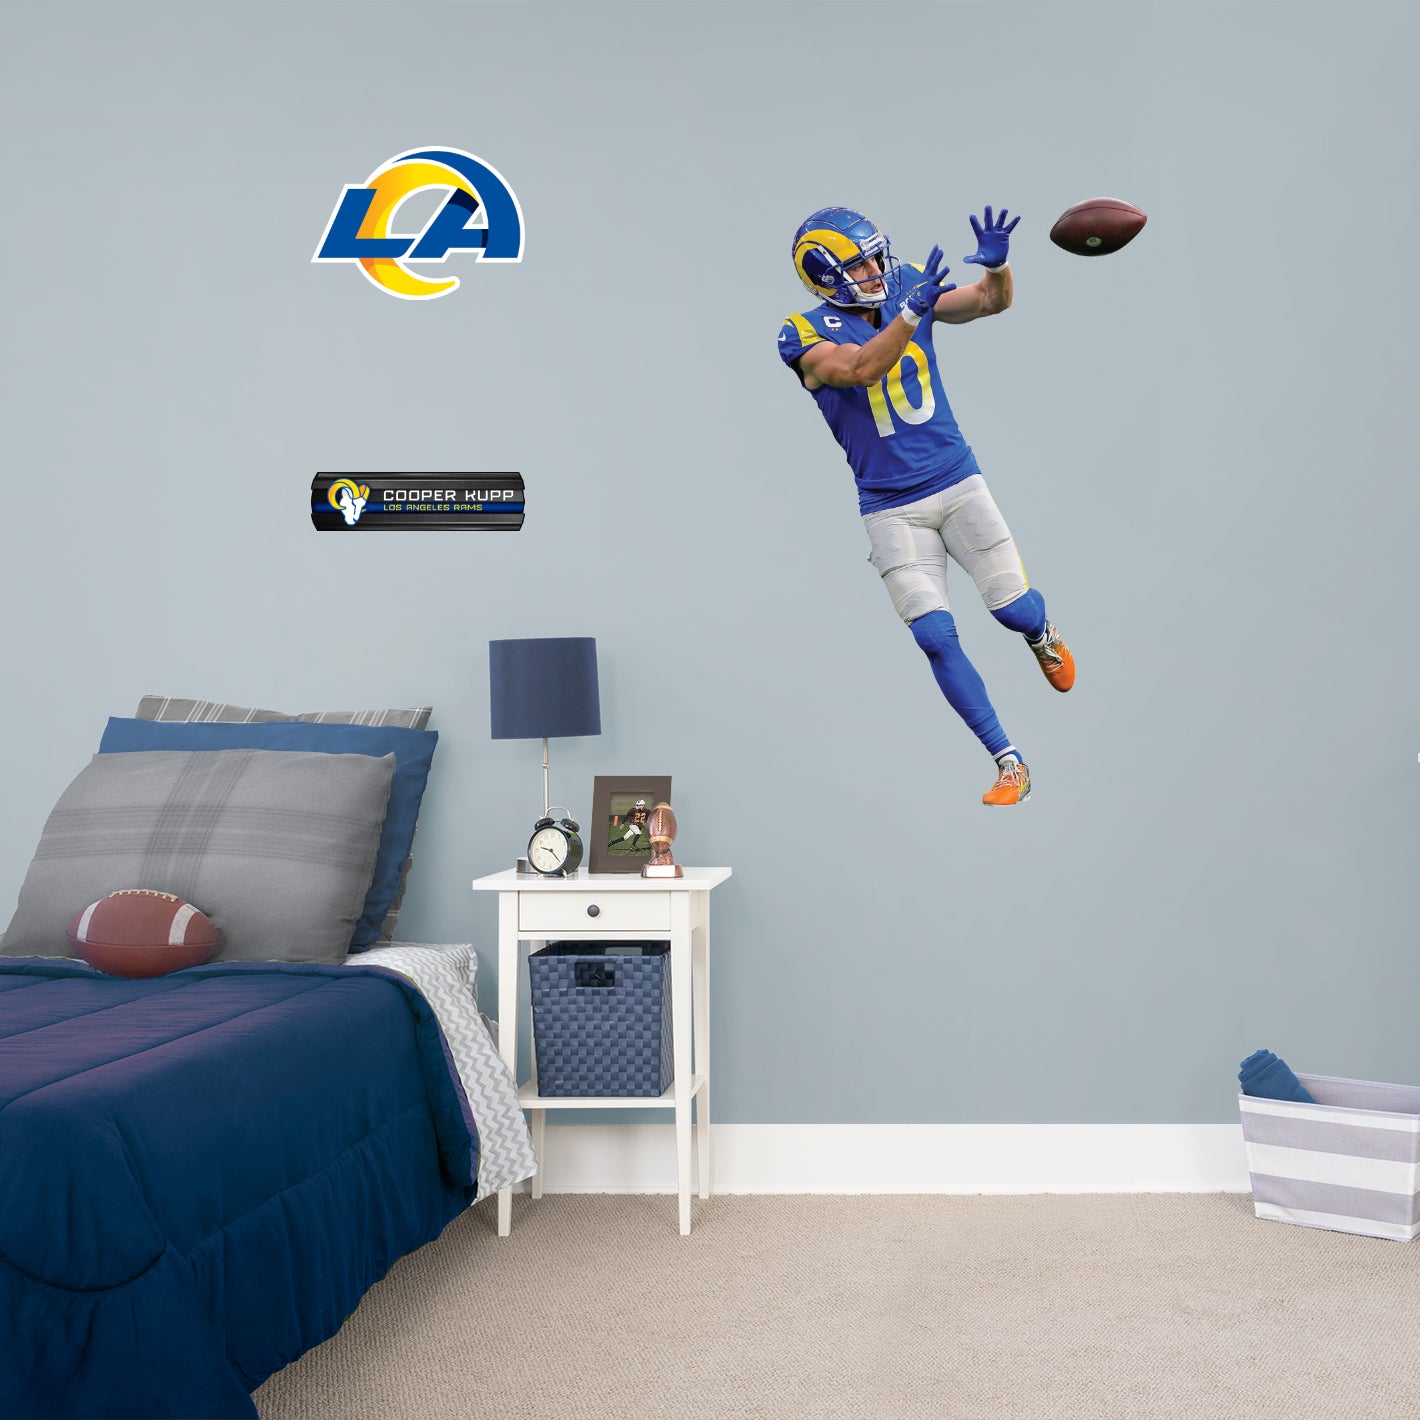 Los Angeles Rams: Cooper Kupp Catch - Officially Licensed NFL Removable Adhesive Decal